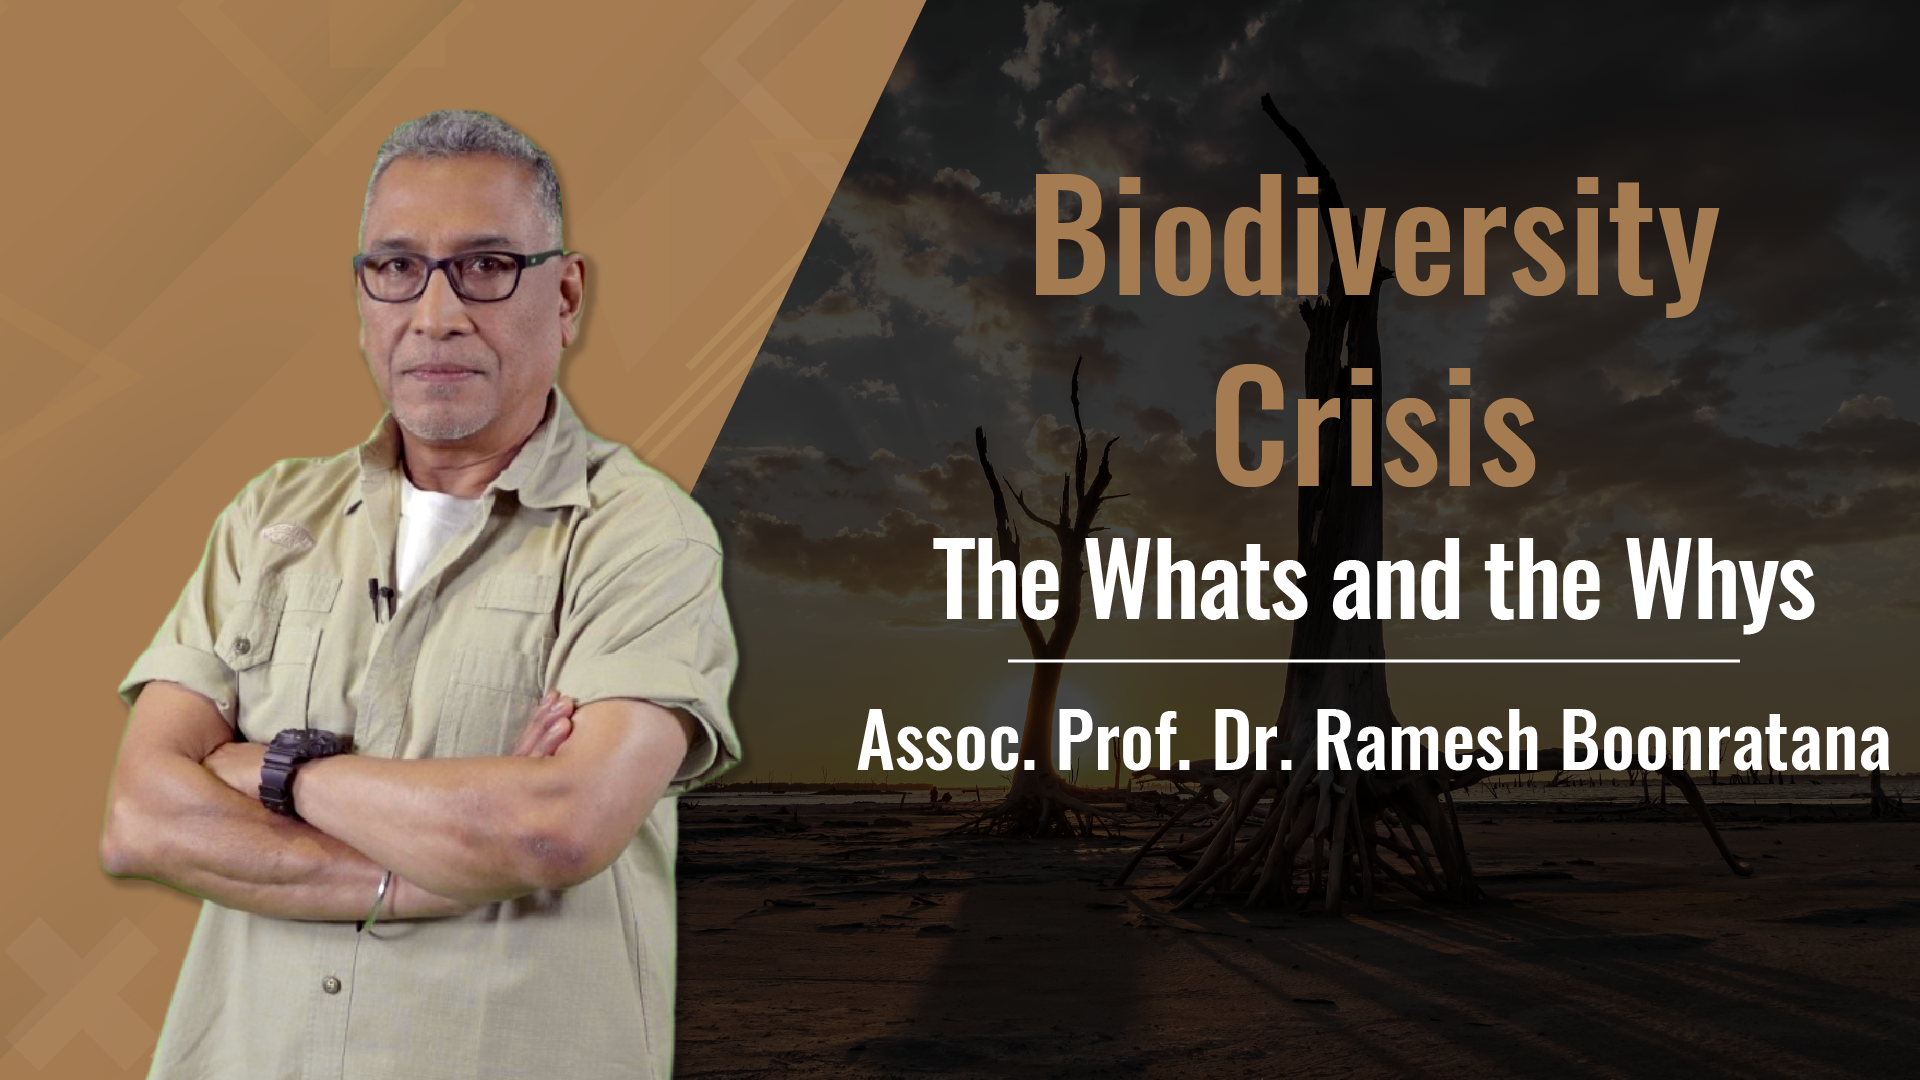 Biodiversity Crisis: The Whats and the Whys 023